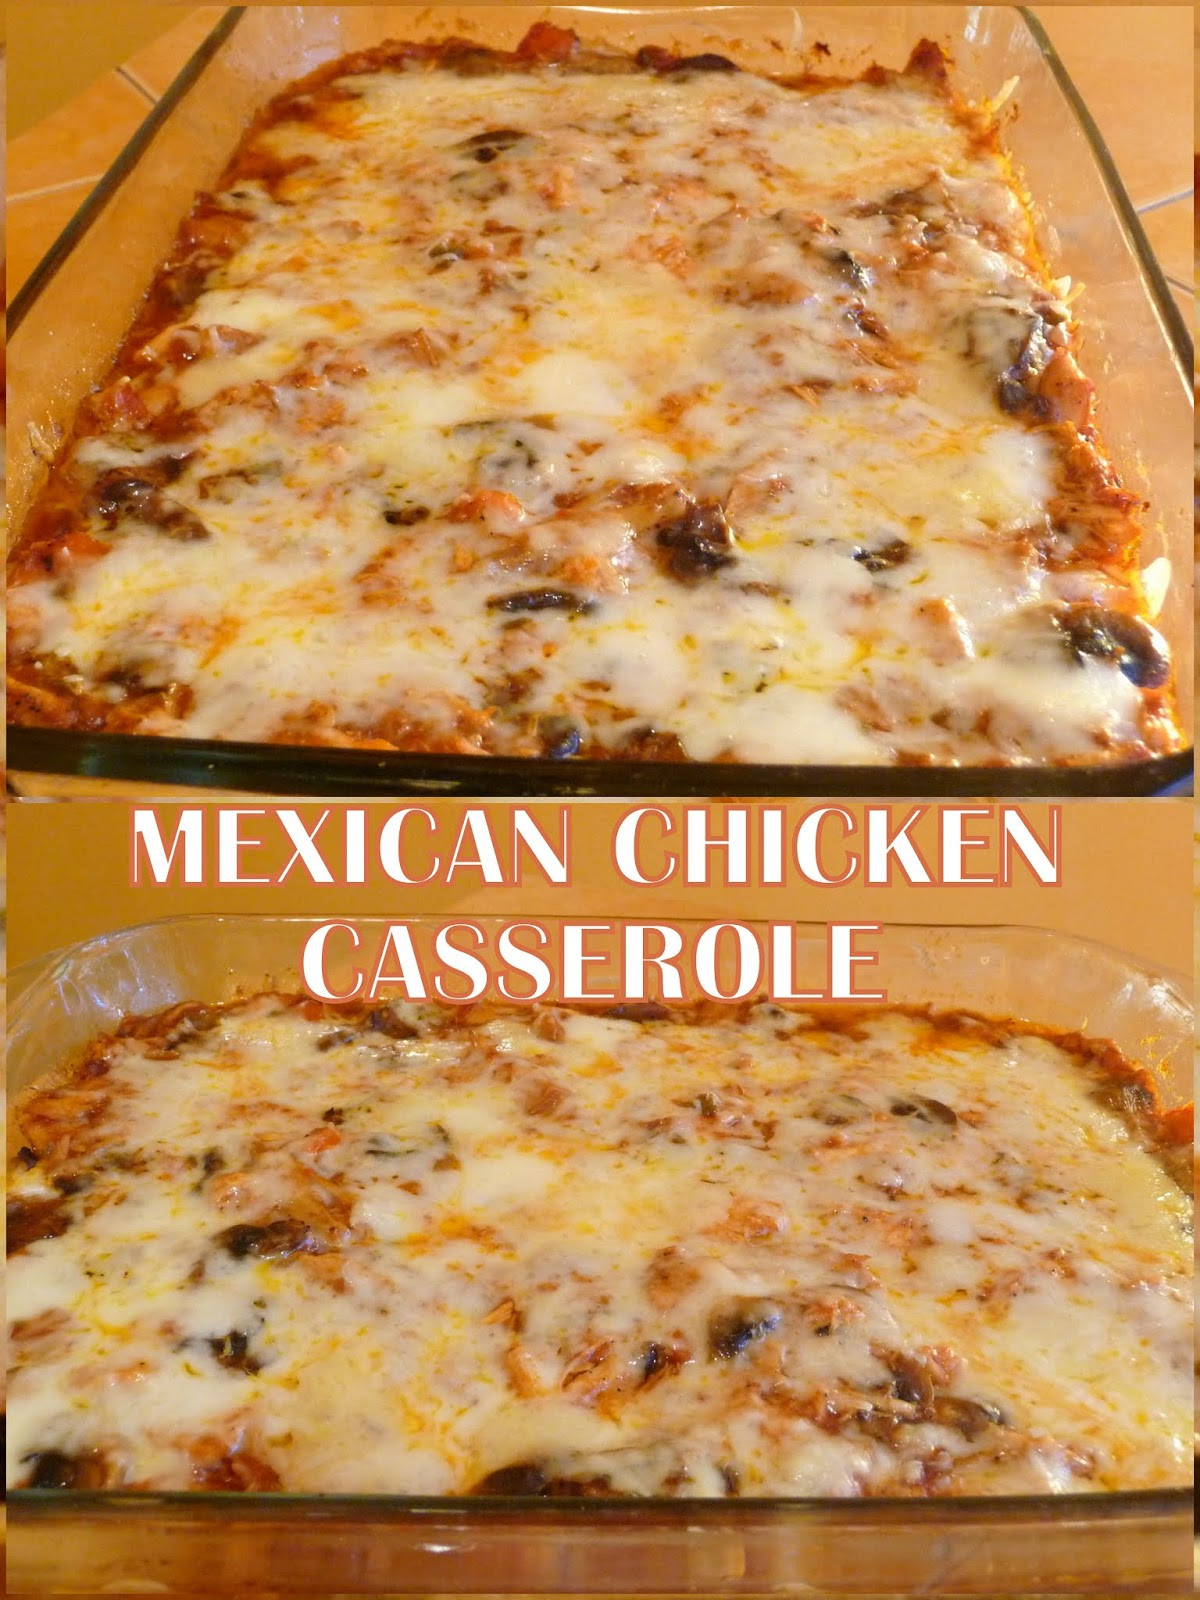 Splendid Low-Carb Mexican Chicken Casserole
 SPLENDID LOW CARBING BY JENNIFER ELOFF MEXICAN CHICKEN